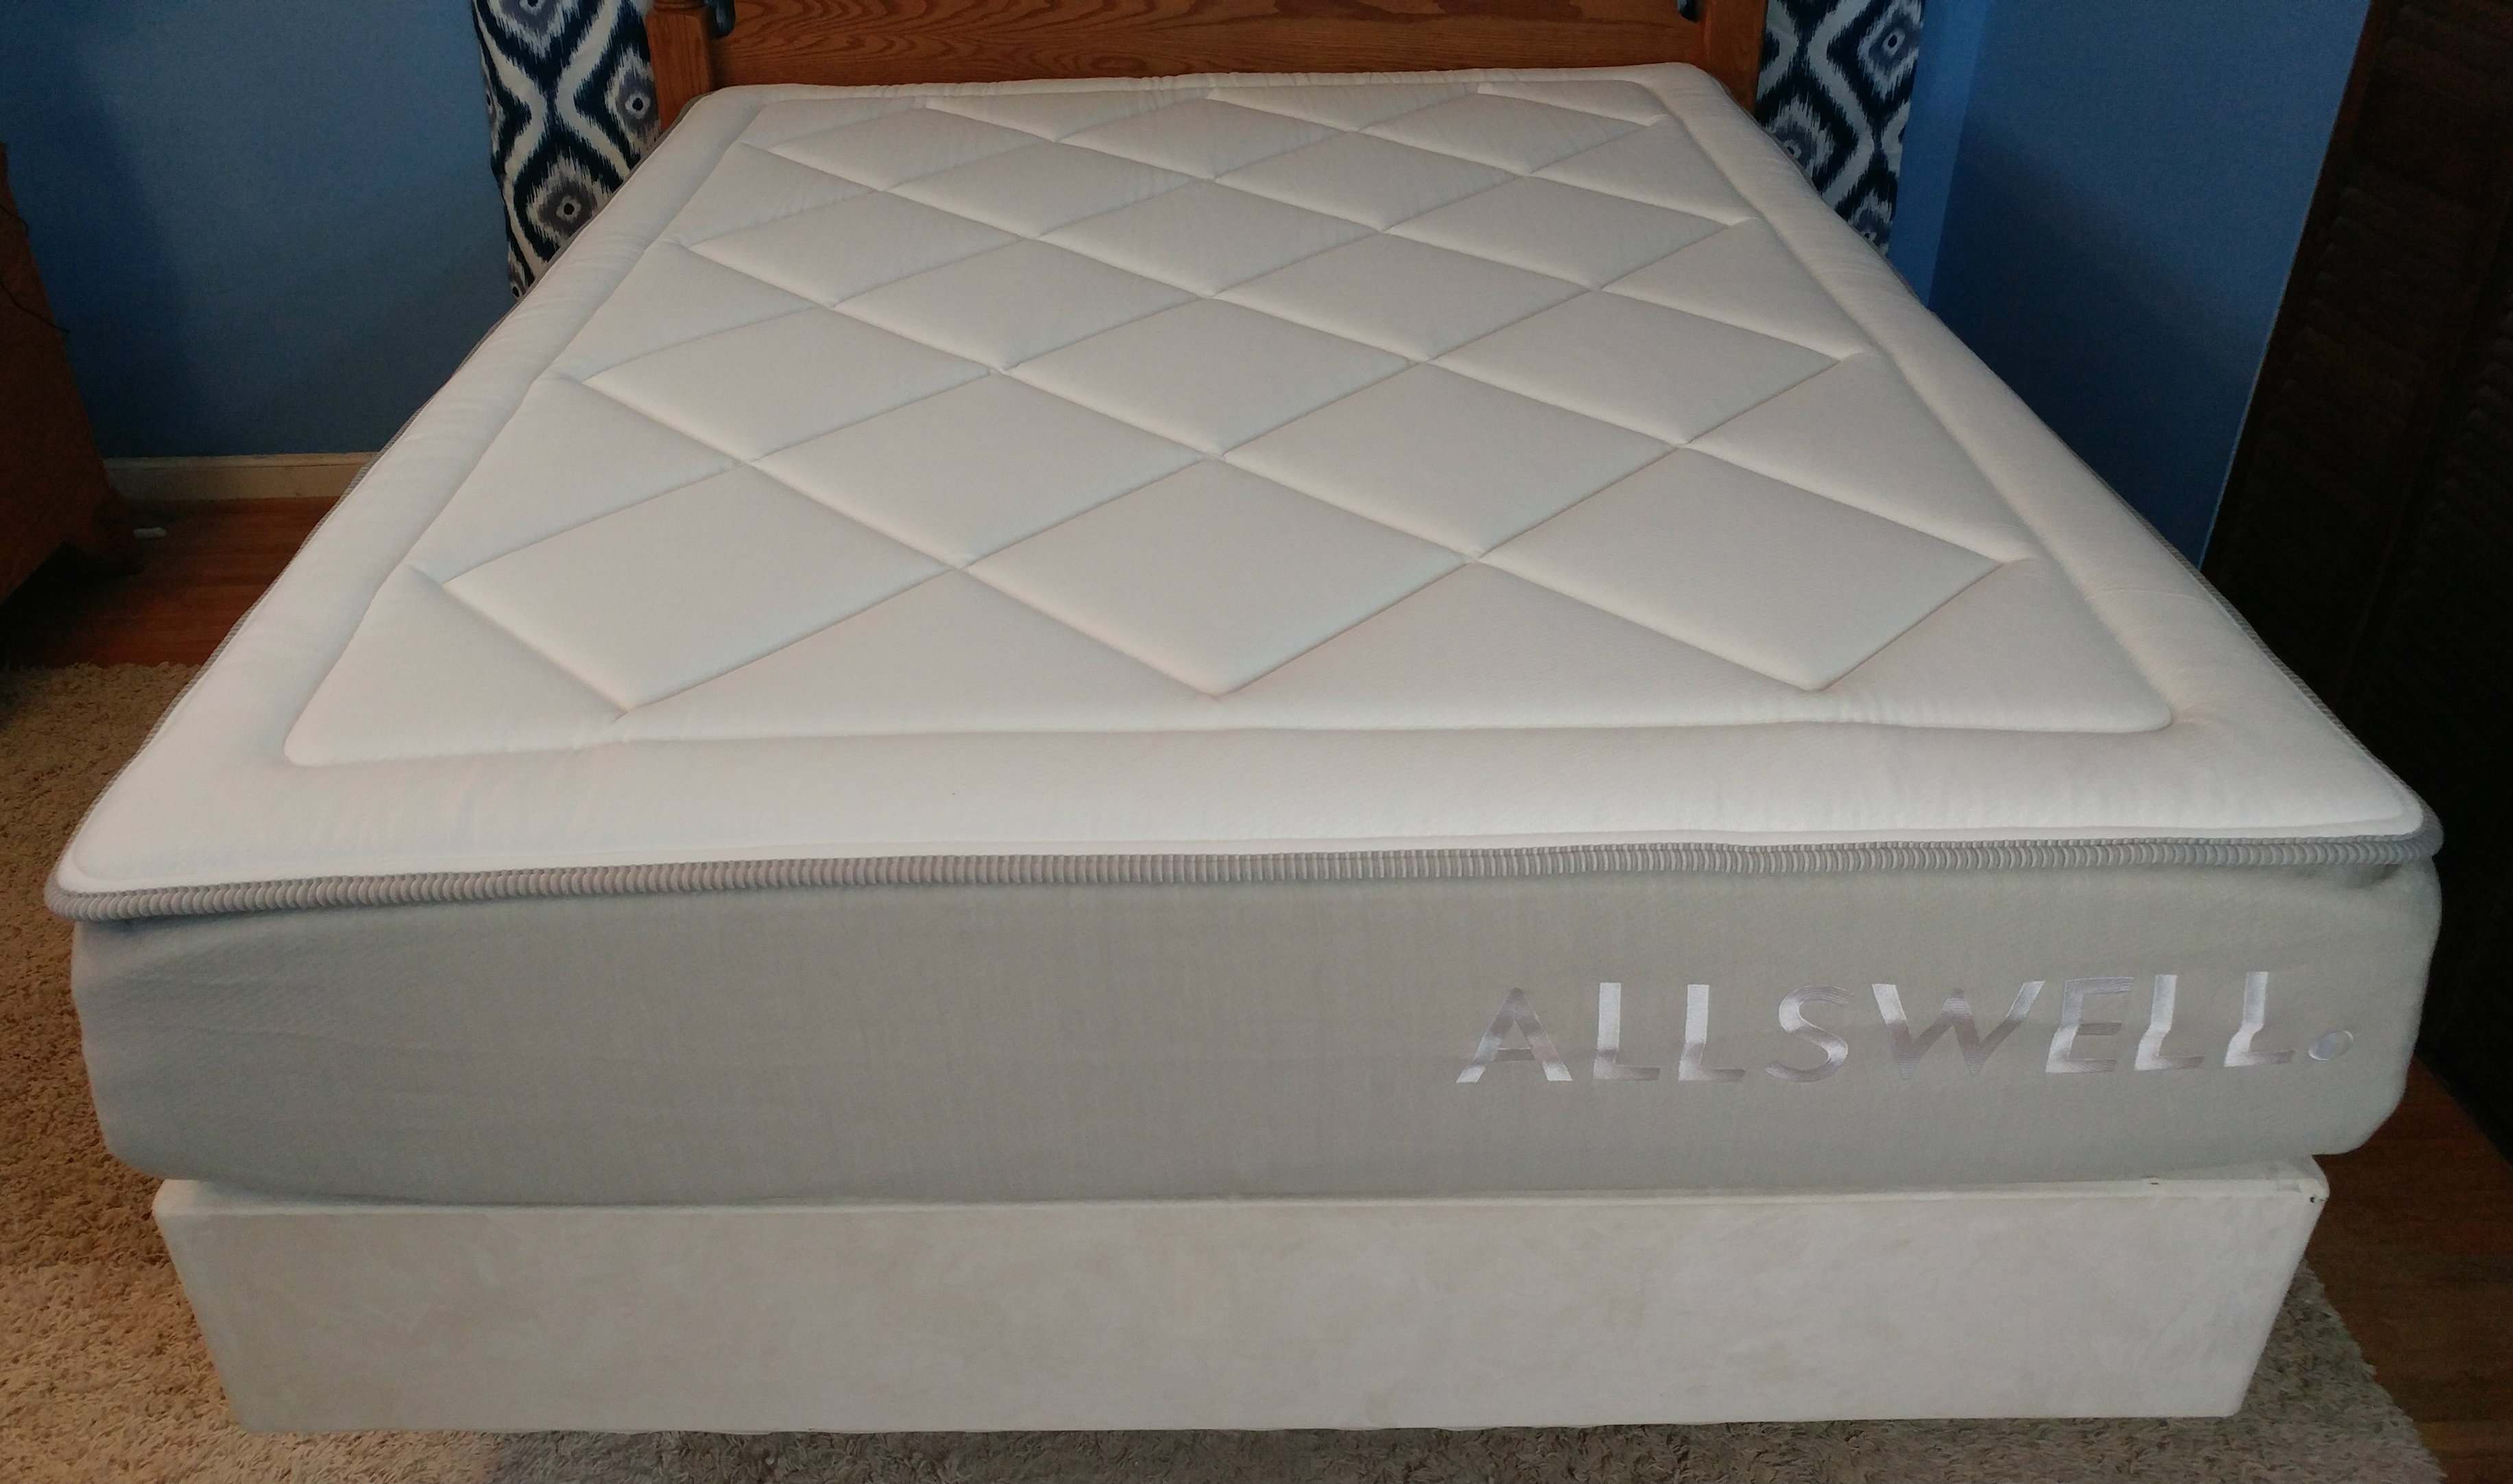 allswell mattress front view